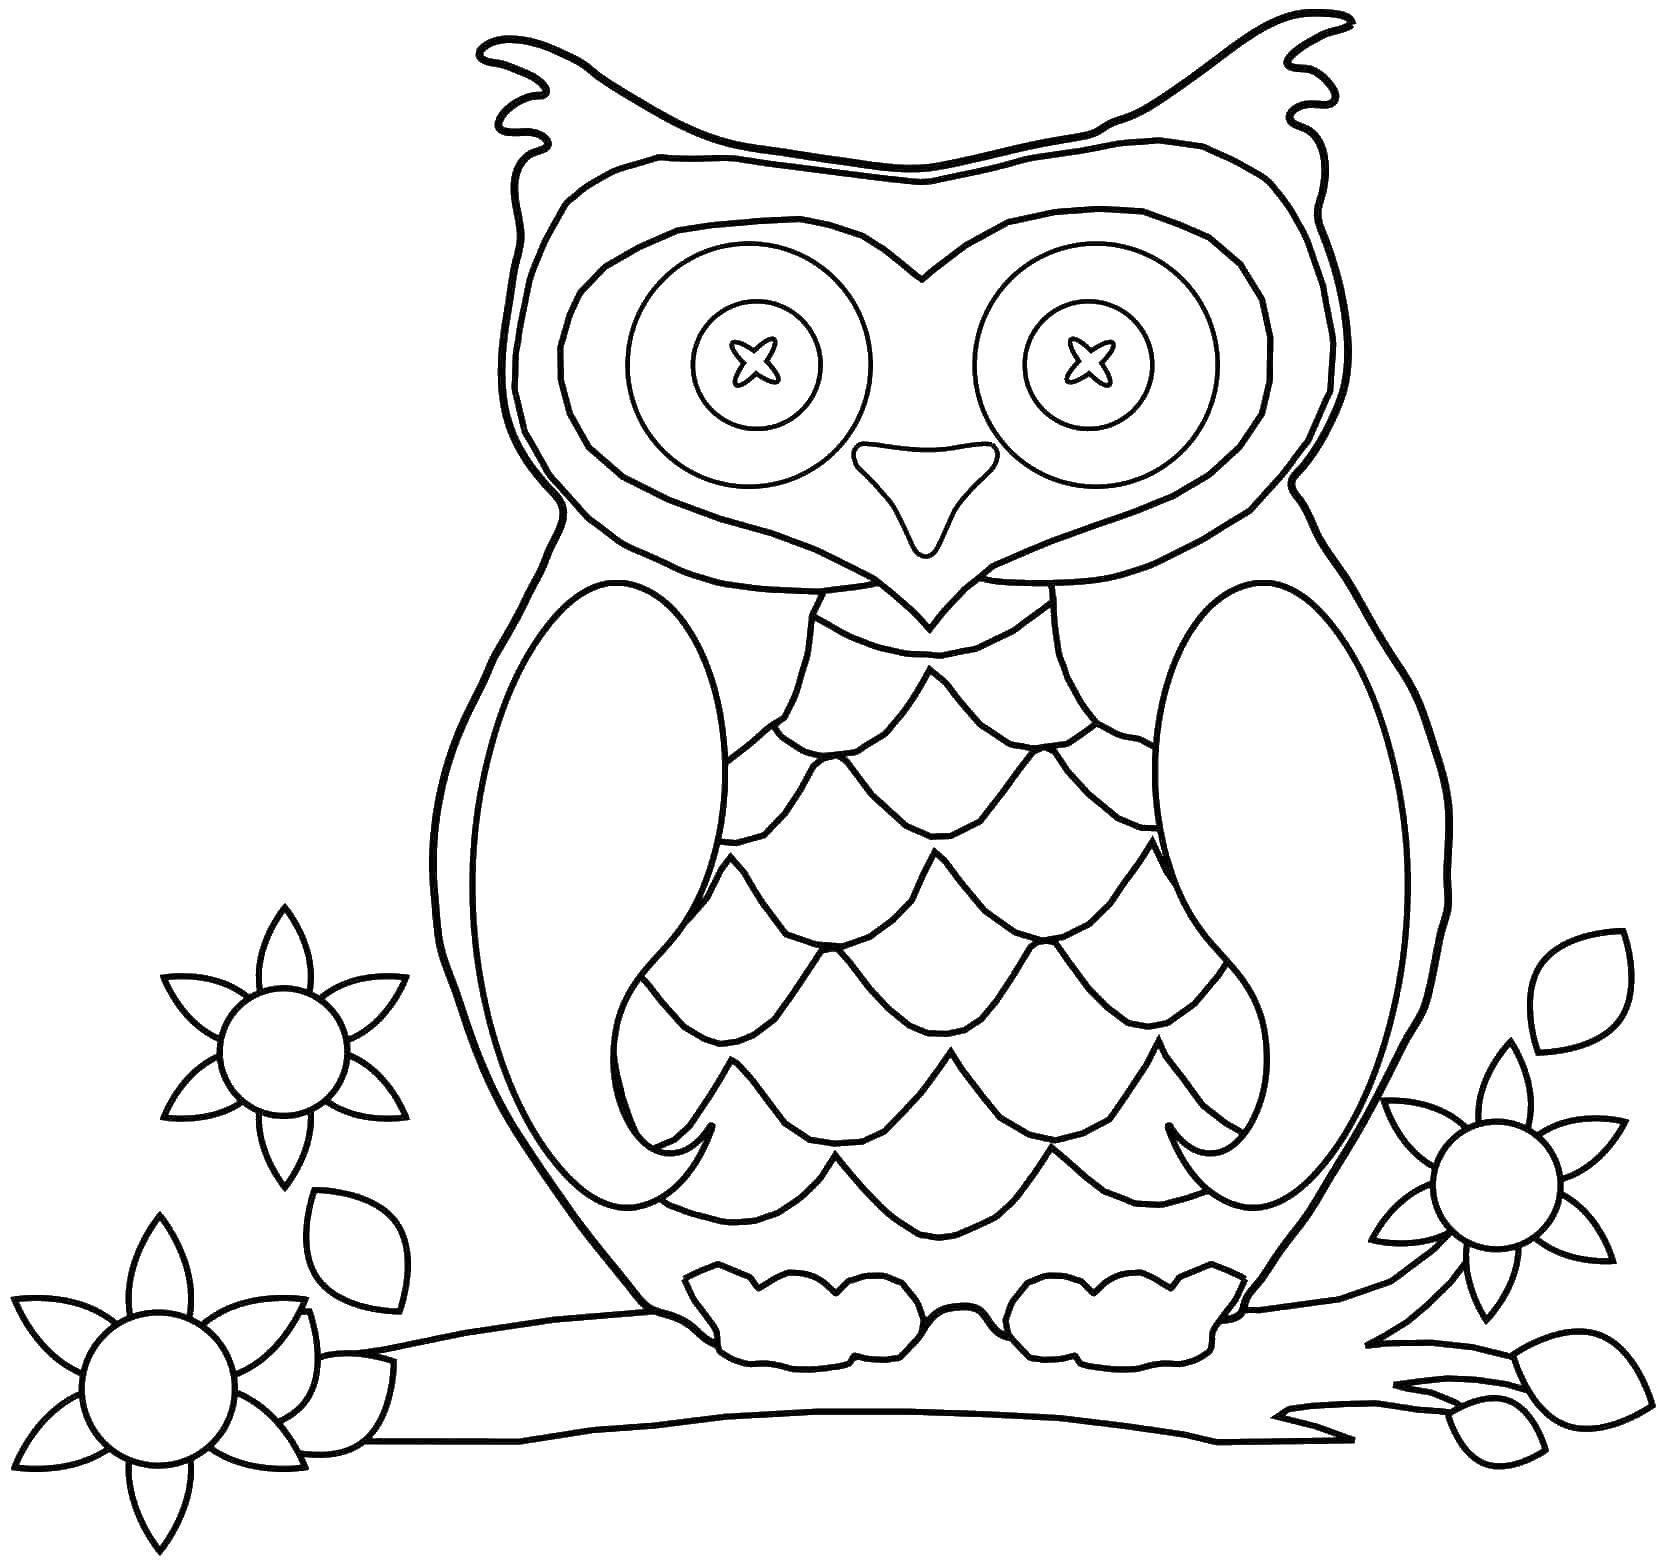 Coloring Owl. Category birds. Tags:  owl.